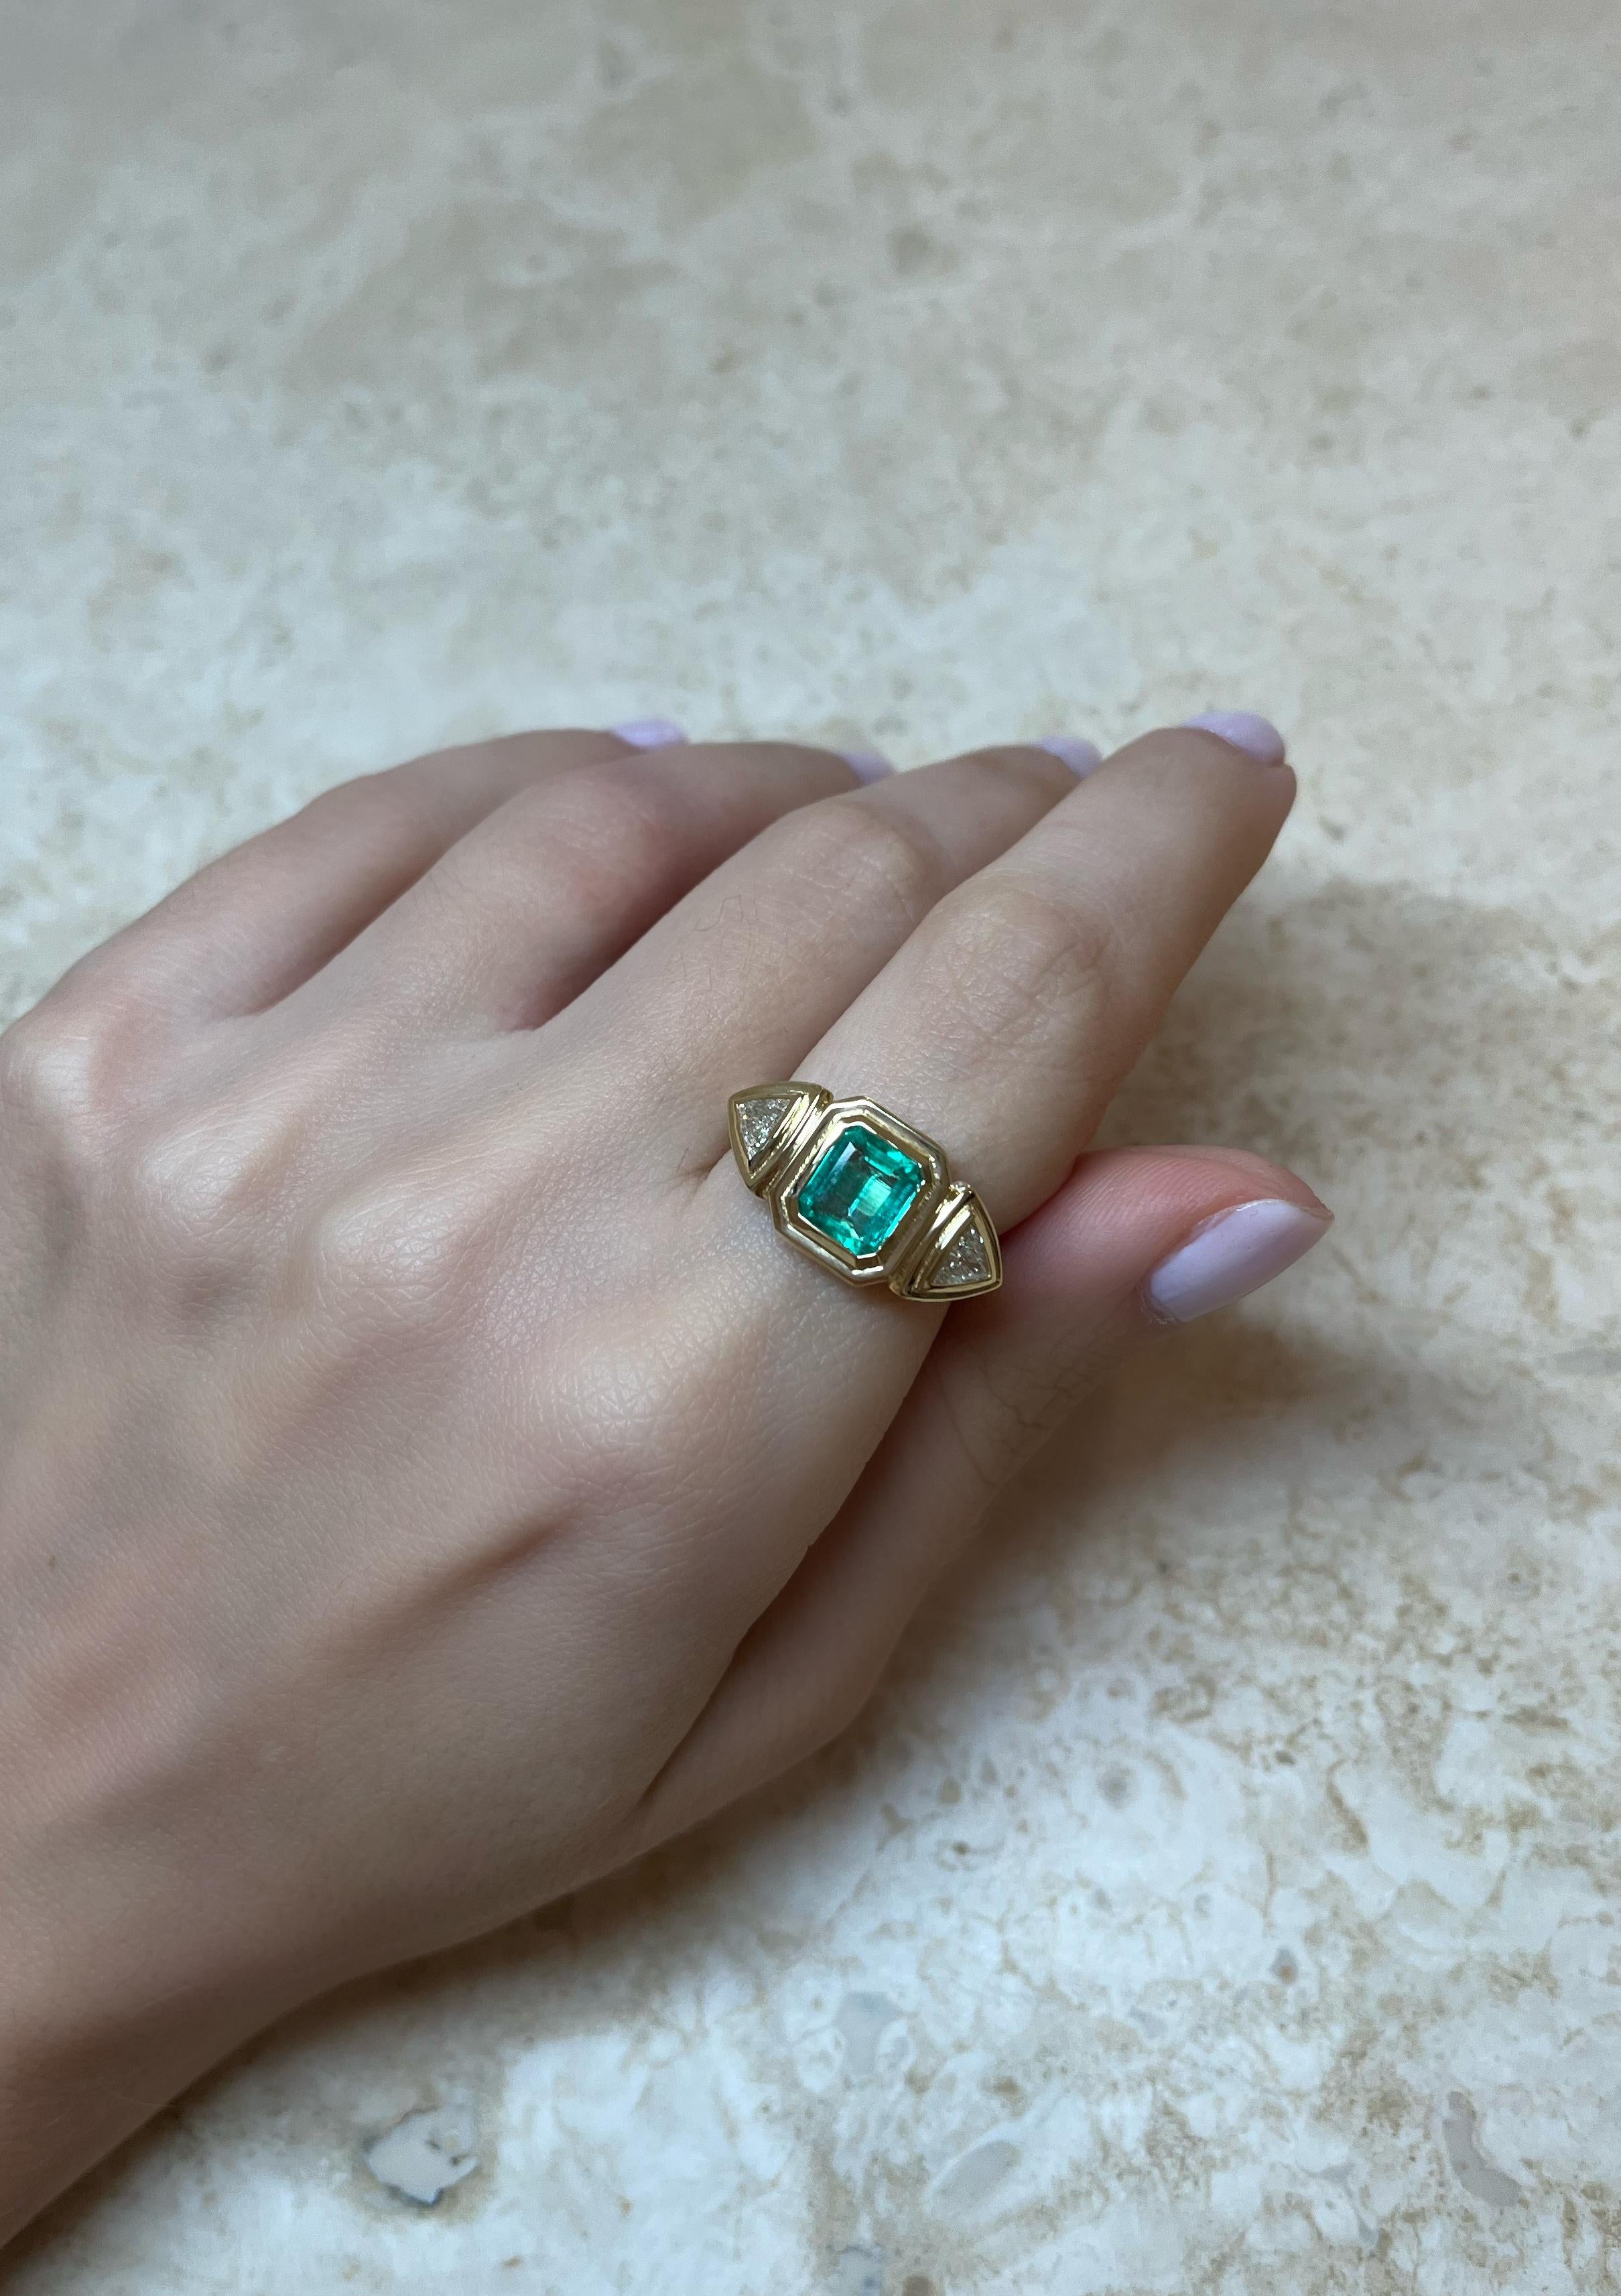 This exquisite 18-karat gold ring is centered with a natural emerald and paired with two natural trillion-cut diamonds, in a geometric stepped setting. 

The ring weighs just over 6grams of gold, giving it a luxurious feel. It's three stone design